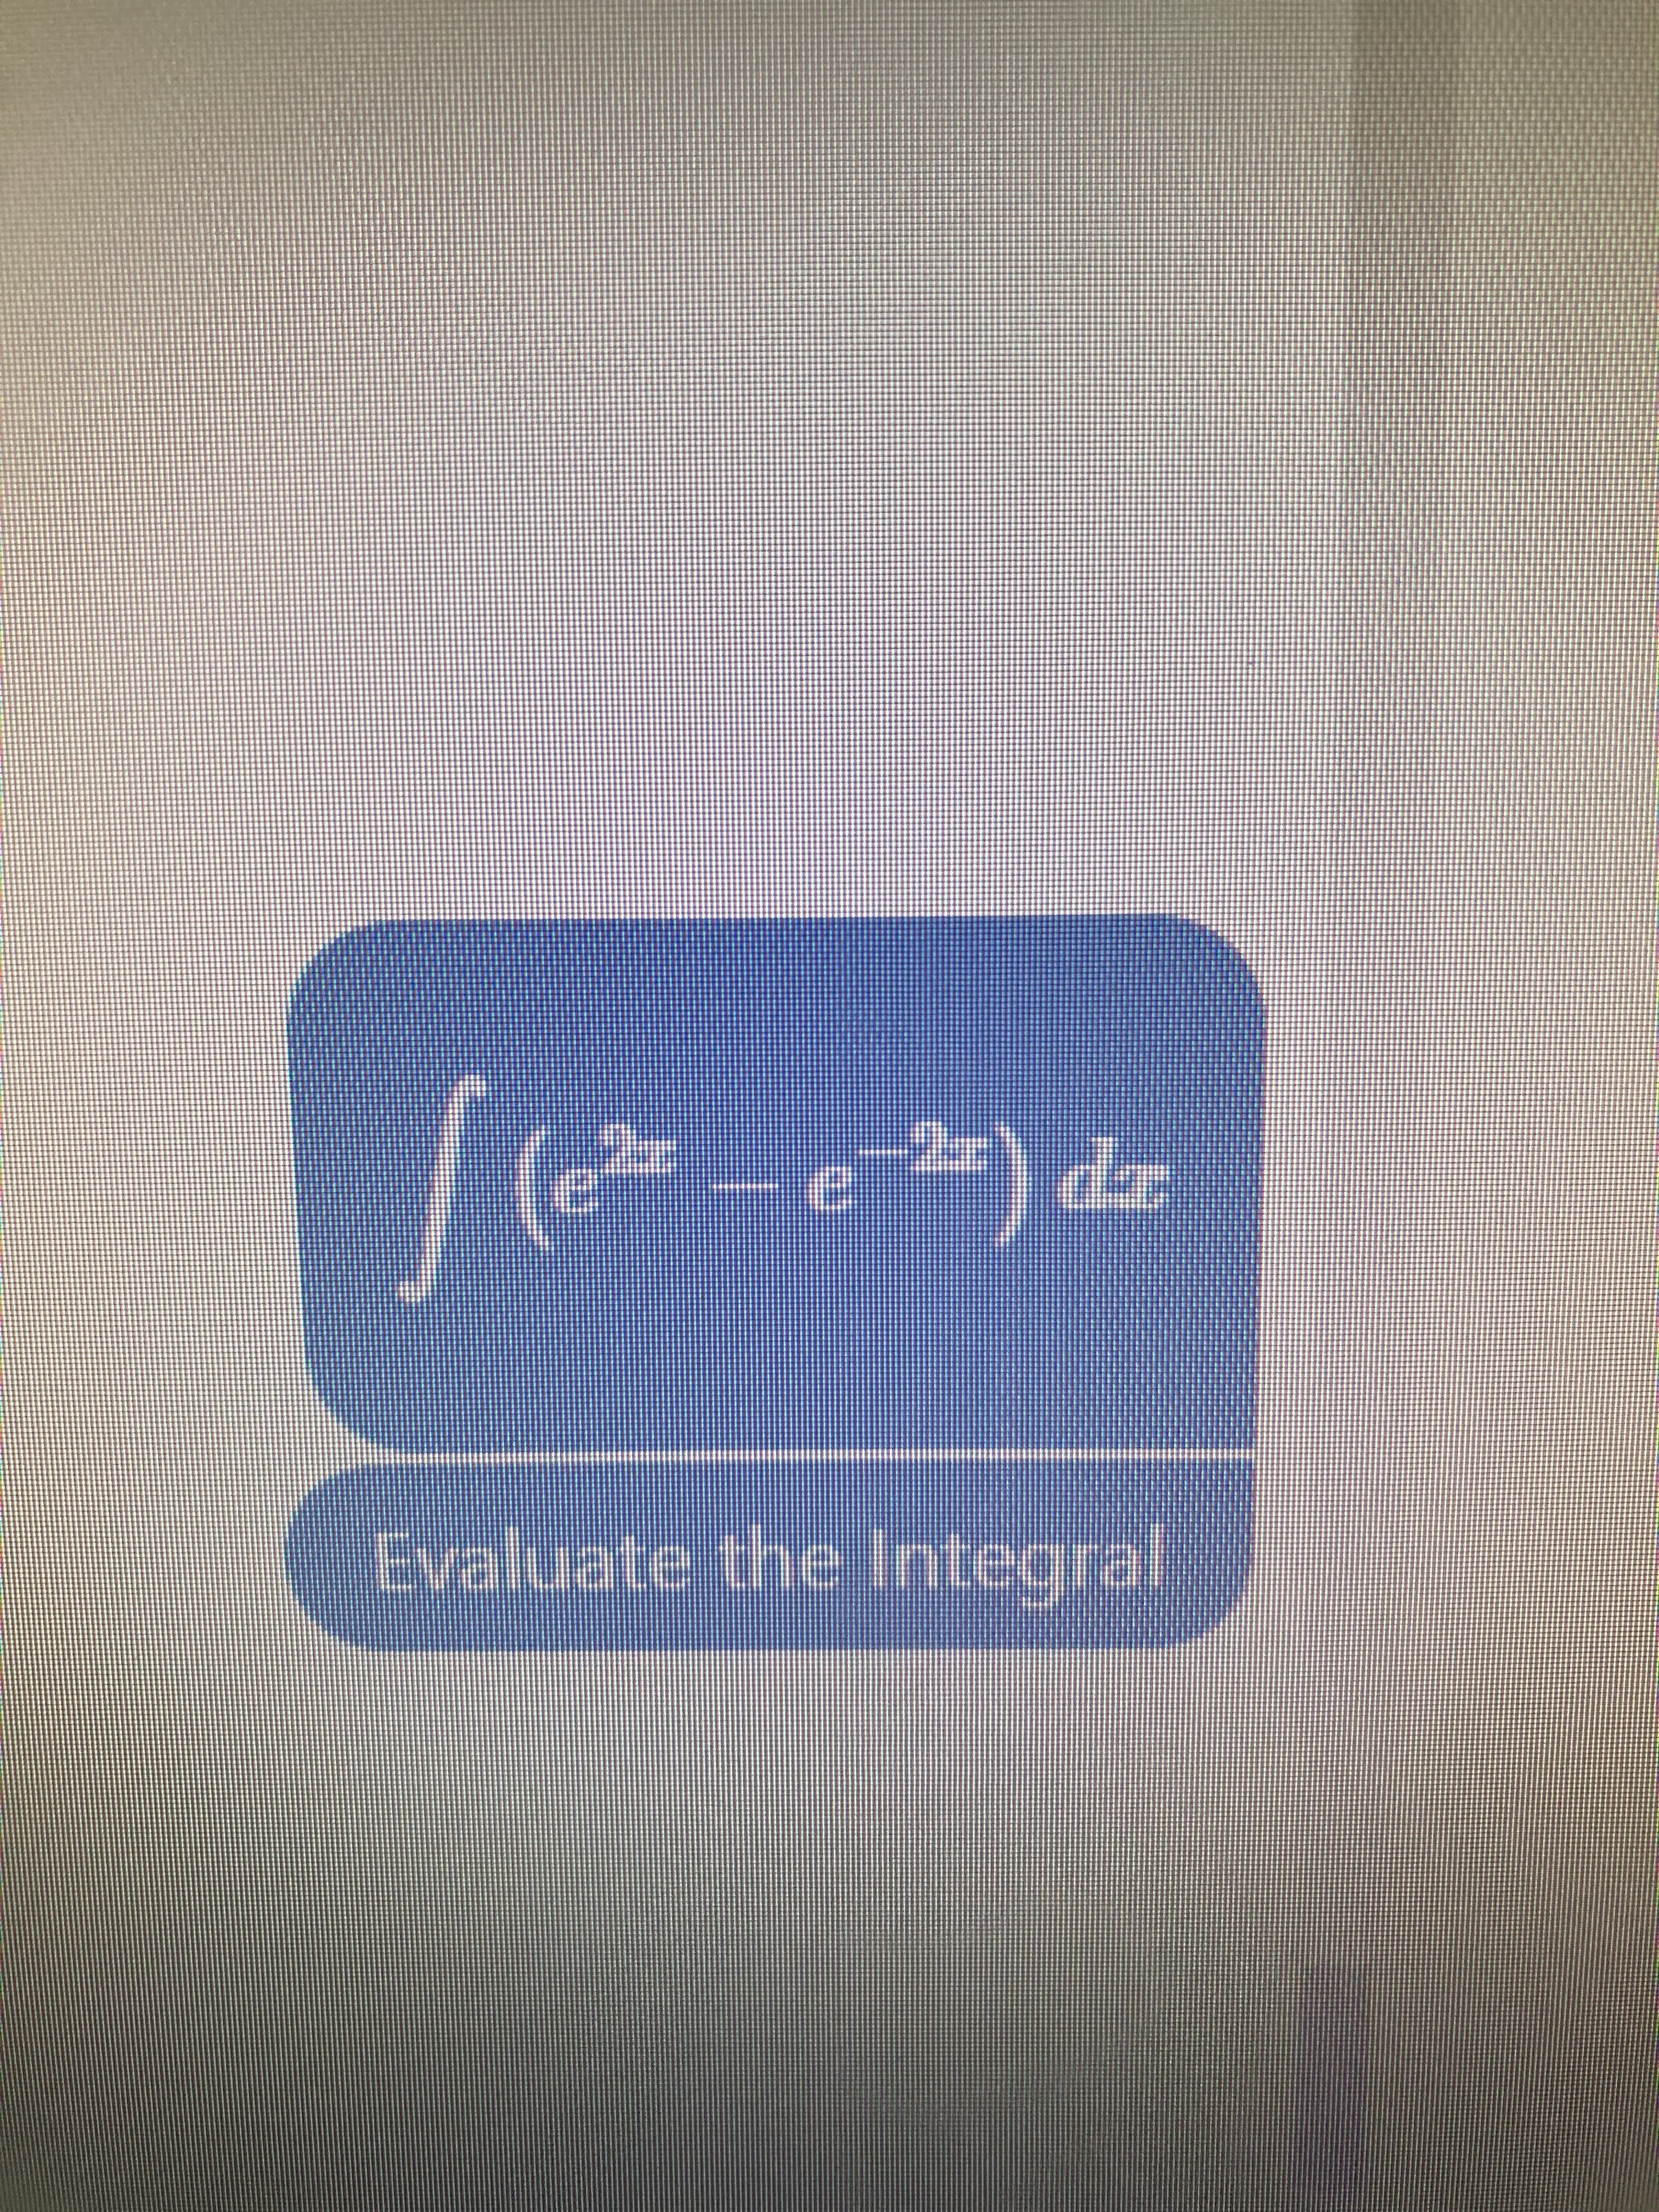 p (a- )|
Evaluate the Integral
